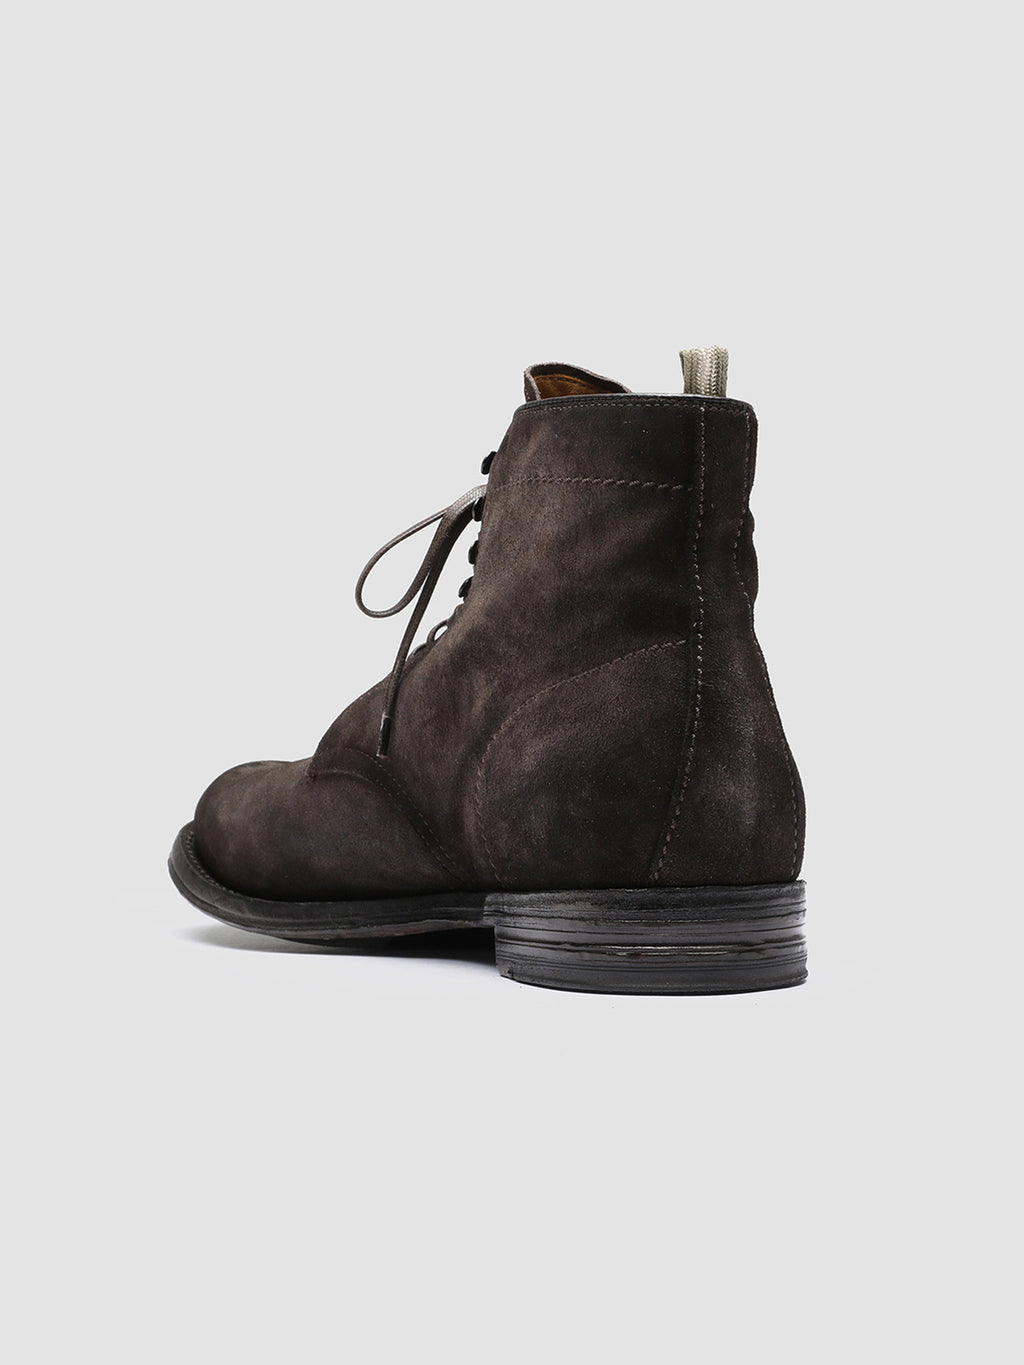 ANATOMIA 013 - Brown Suede Ankle Boots